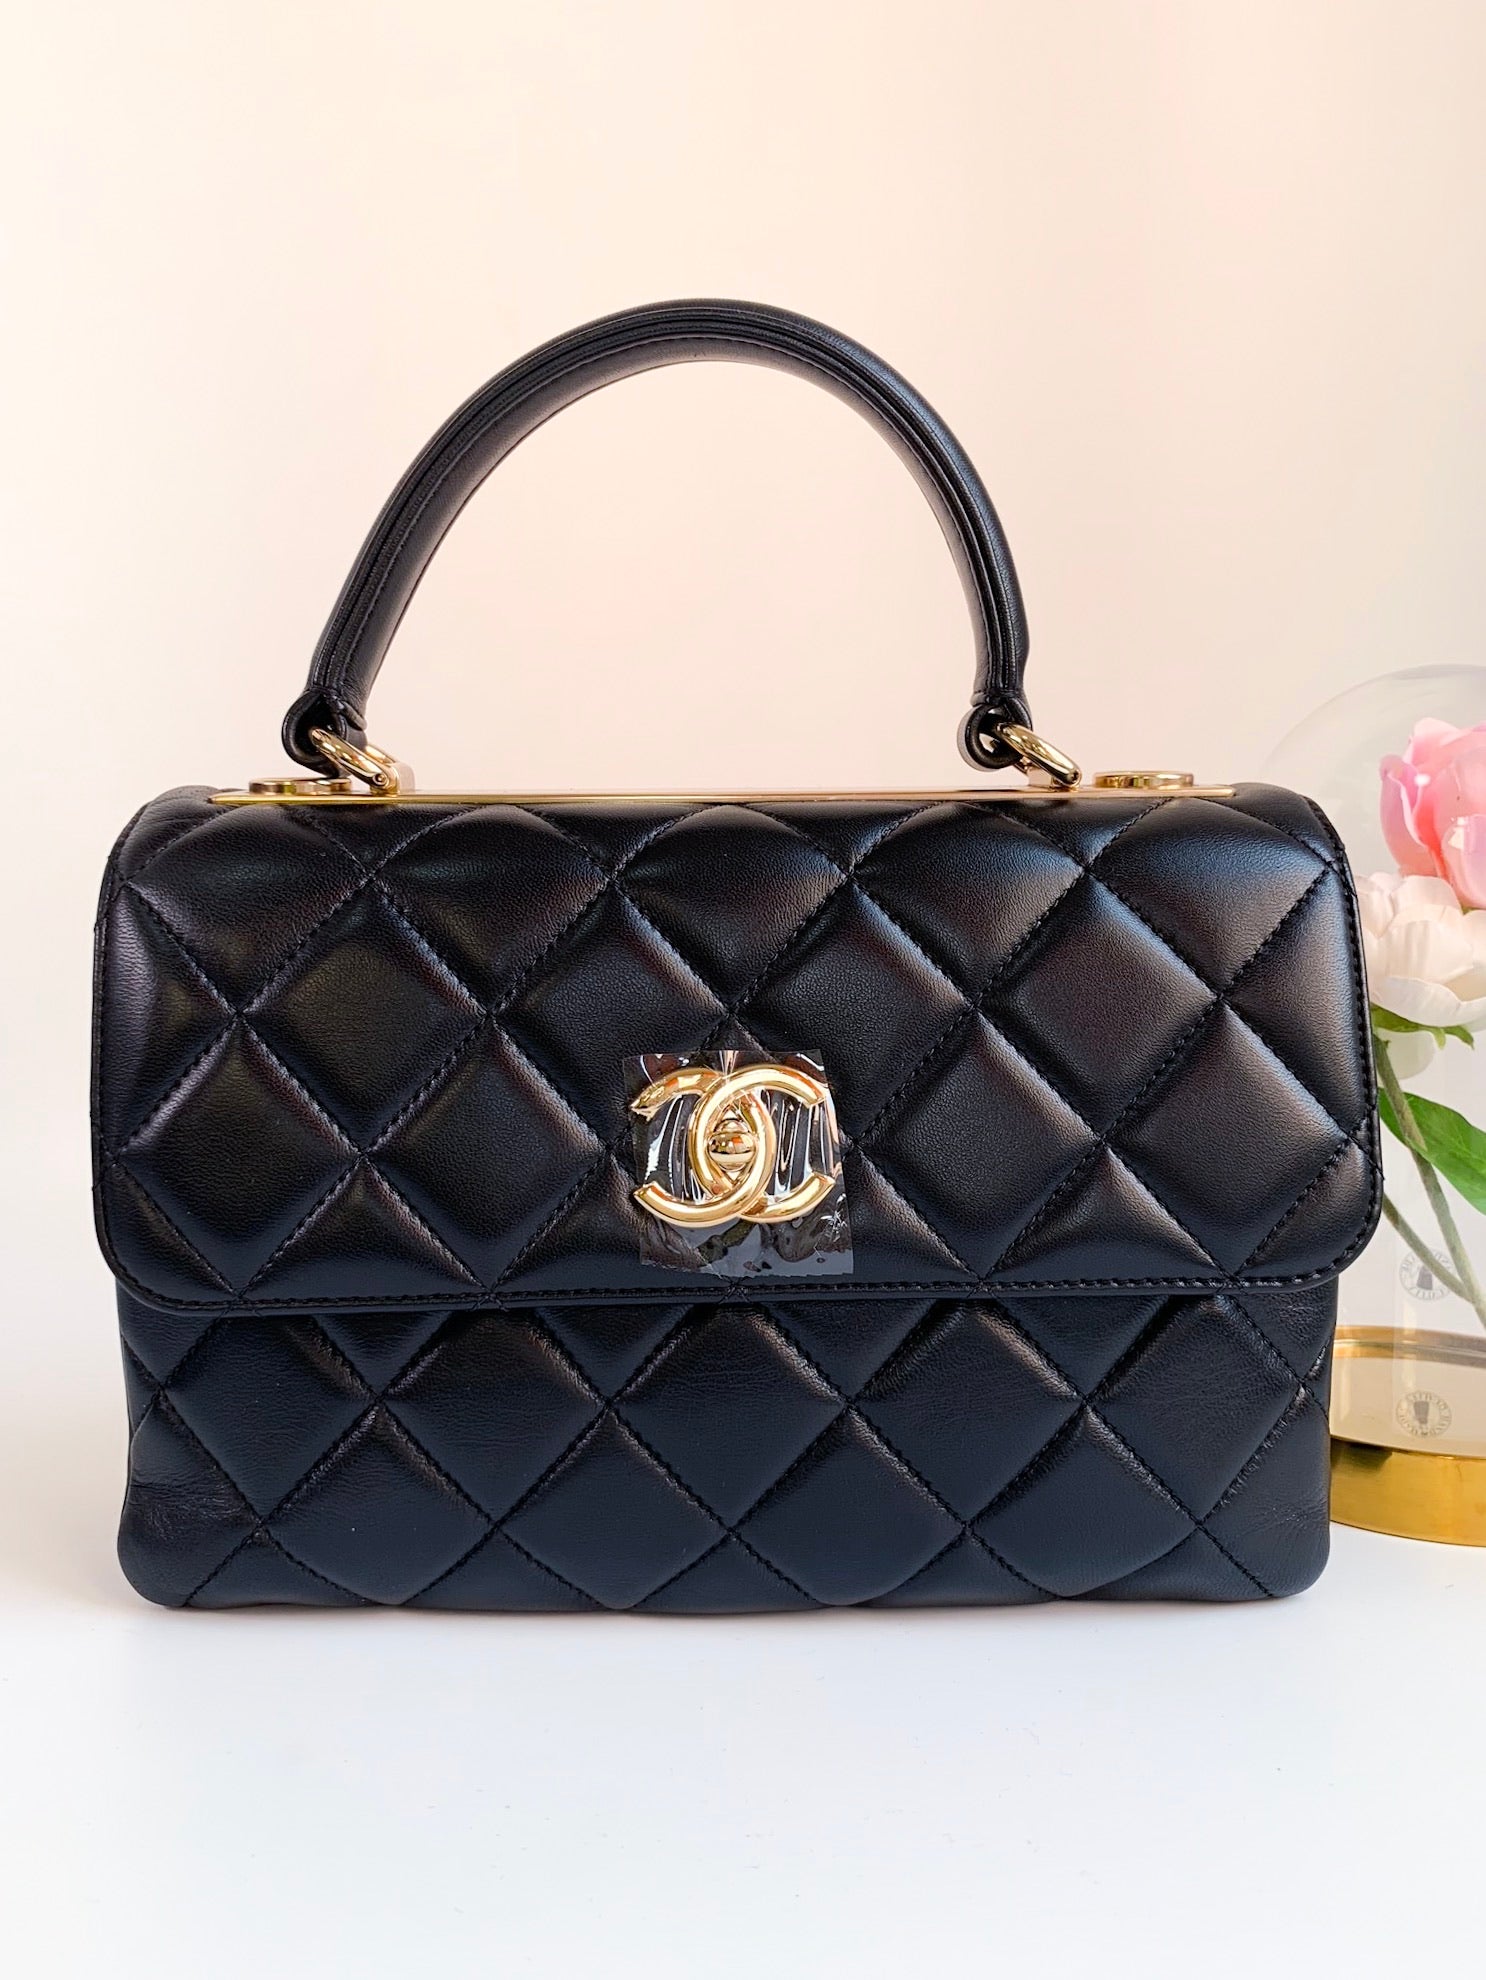 Chanel Lambskin Quilted Small Trendy CC Dual Handle Flap Bag Black